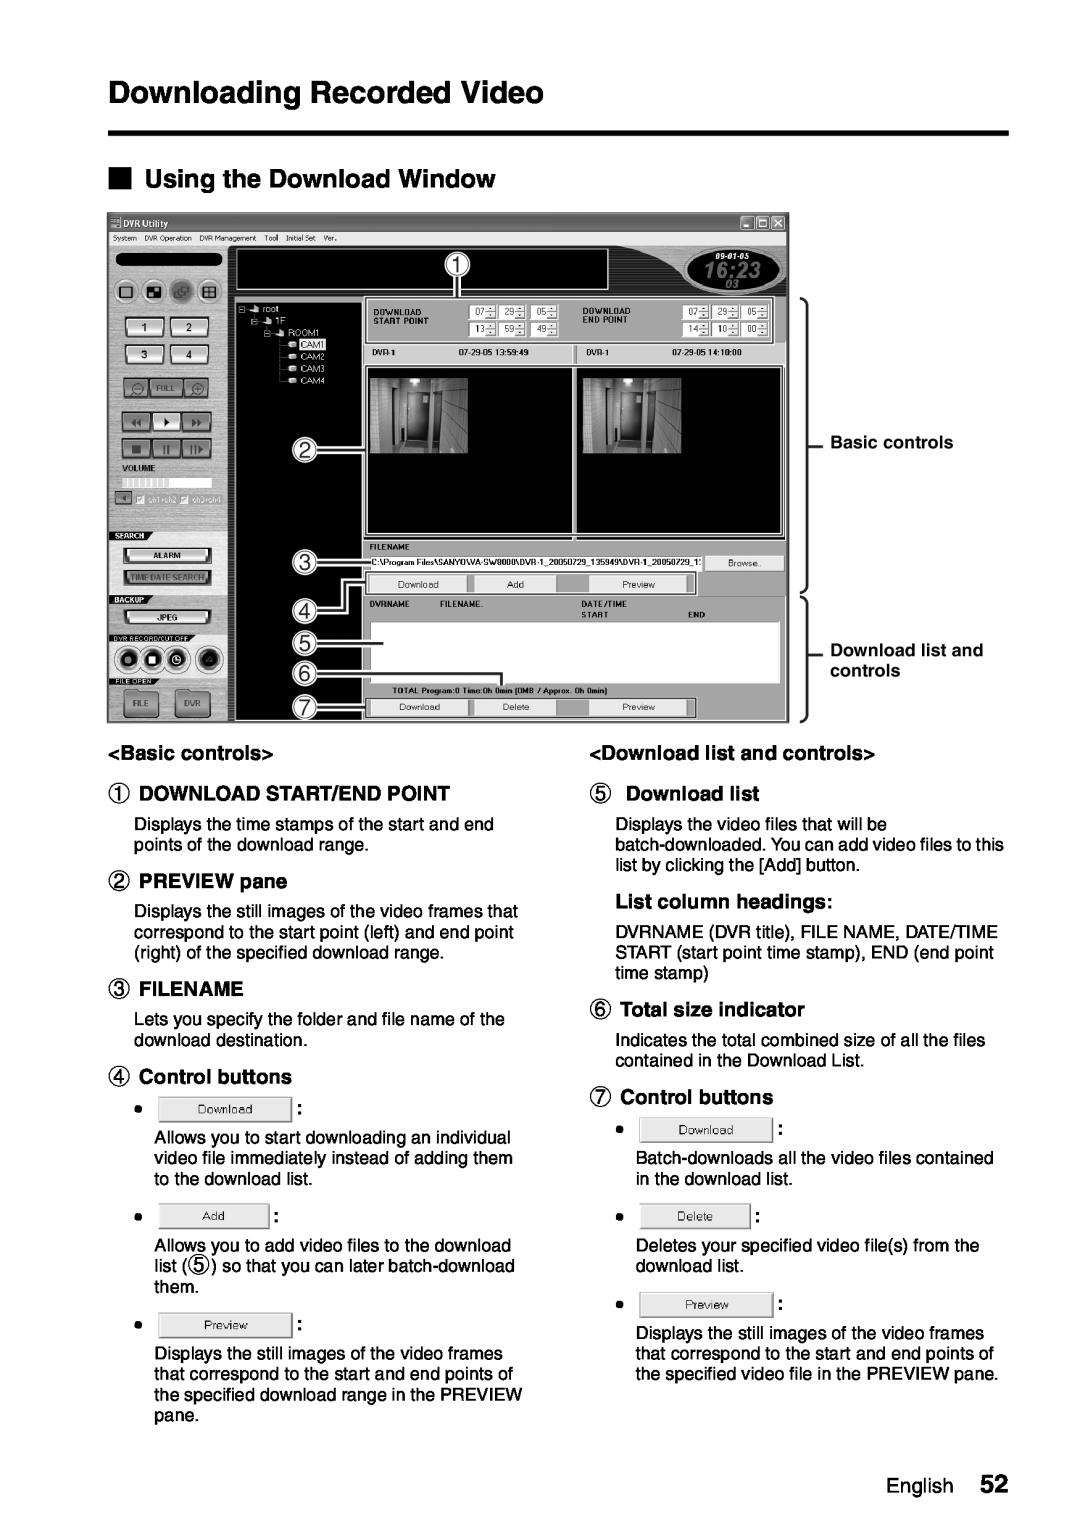 Sanyo VA-SW8000LITE bUsing the Download Window, 1 2 3 4 5 6, <Basic controls> 1DOWNLOAD START/END POINT, 2PREVIEW pane 